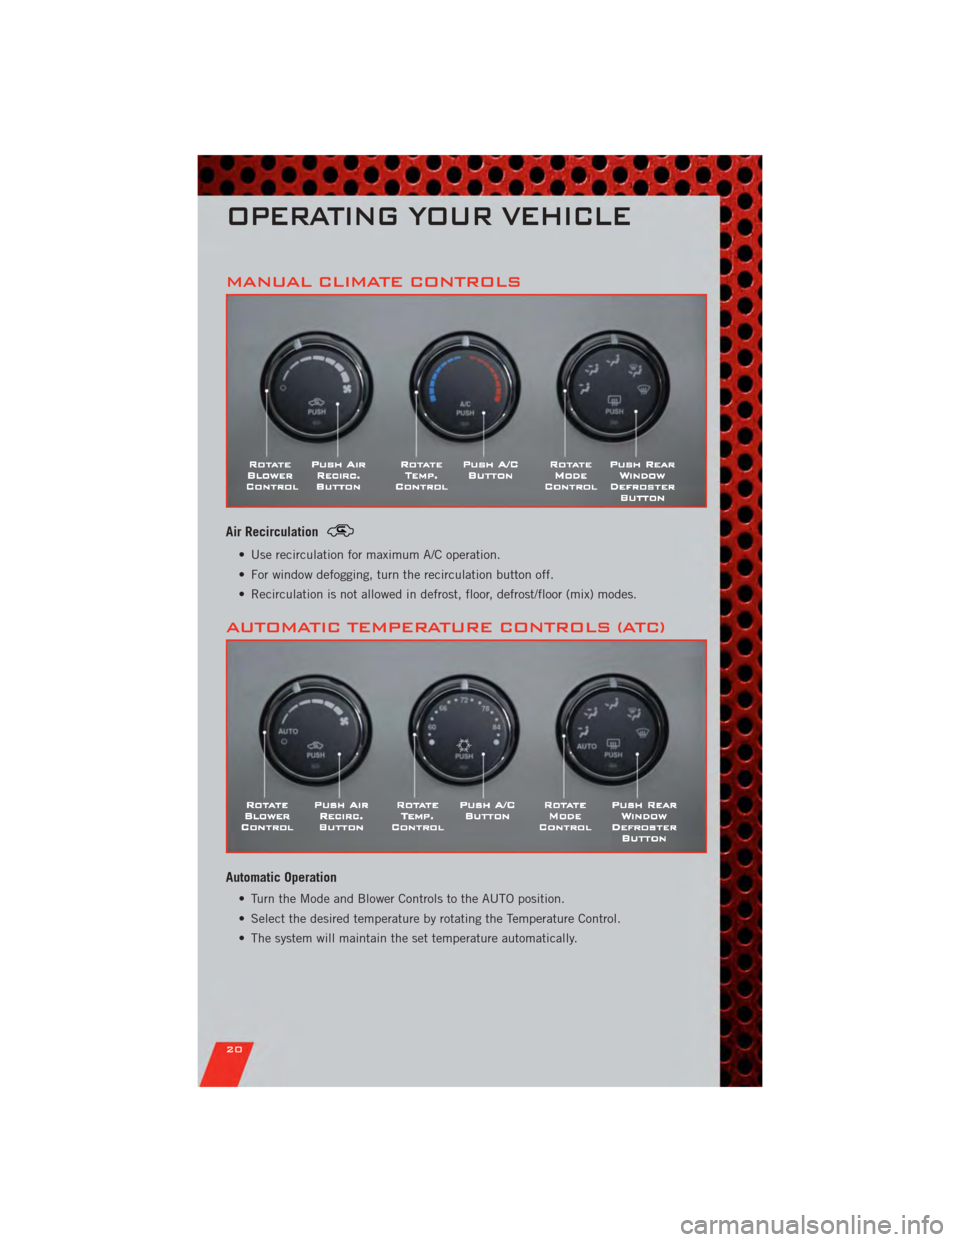 DODGE NITRO 2011 1.G User Guide MANUAL CLIMATE CONTROLS
Air Recirculation
• Use recirculation for maximum A/C operation.
• For window defogging, turn the recirculation button off.
• Recirculation is not allowed in defrost, flo